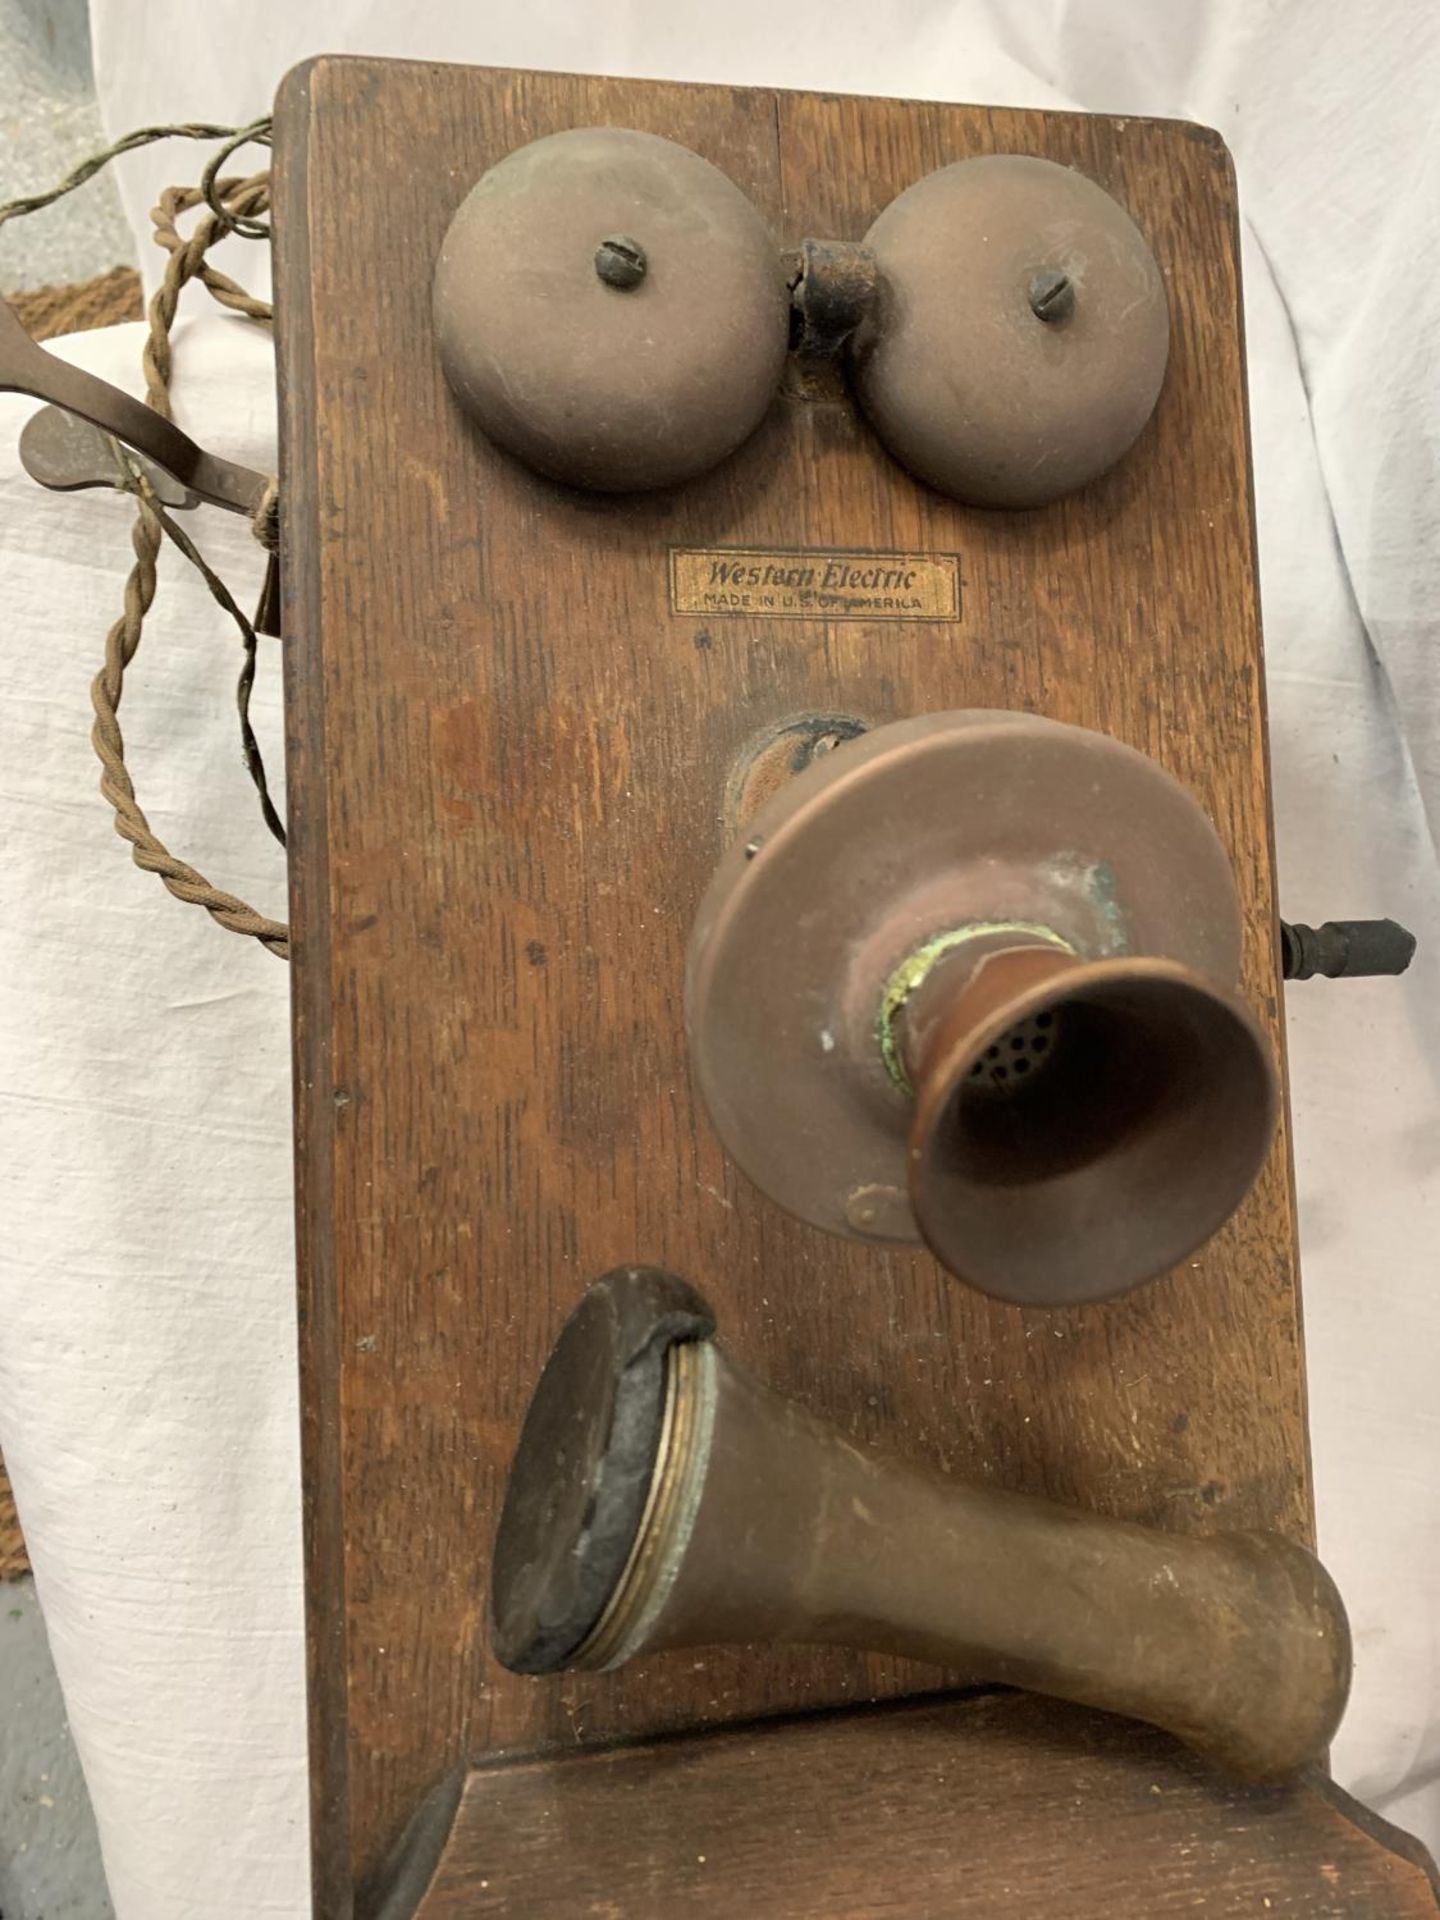 A VINTAGE TELEPHONE WITH DAFFODIL HANDSET AND METAL DOMED BELLS IN AN OAK WALL CASE - Image 4 of 4